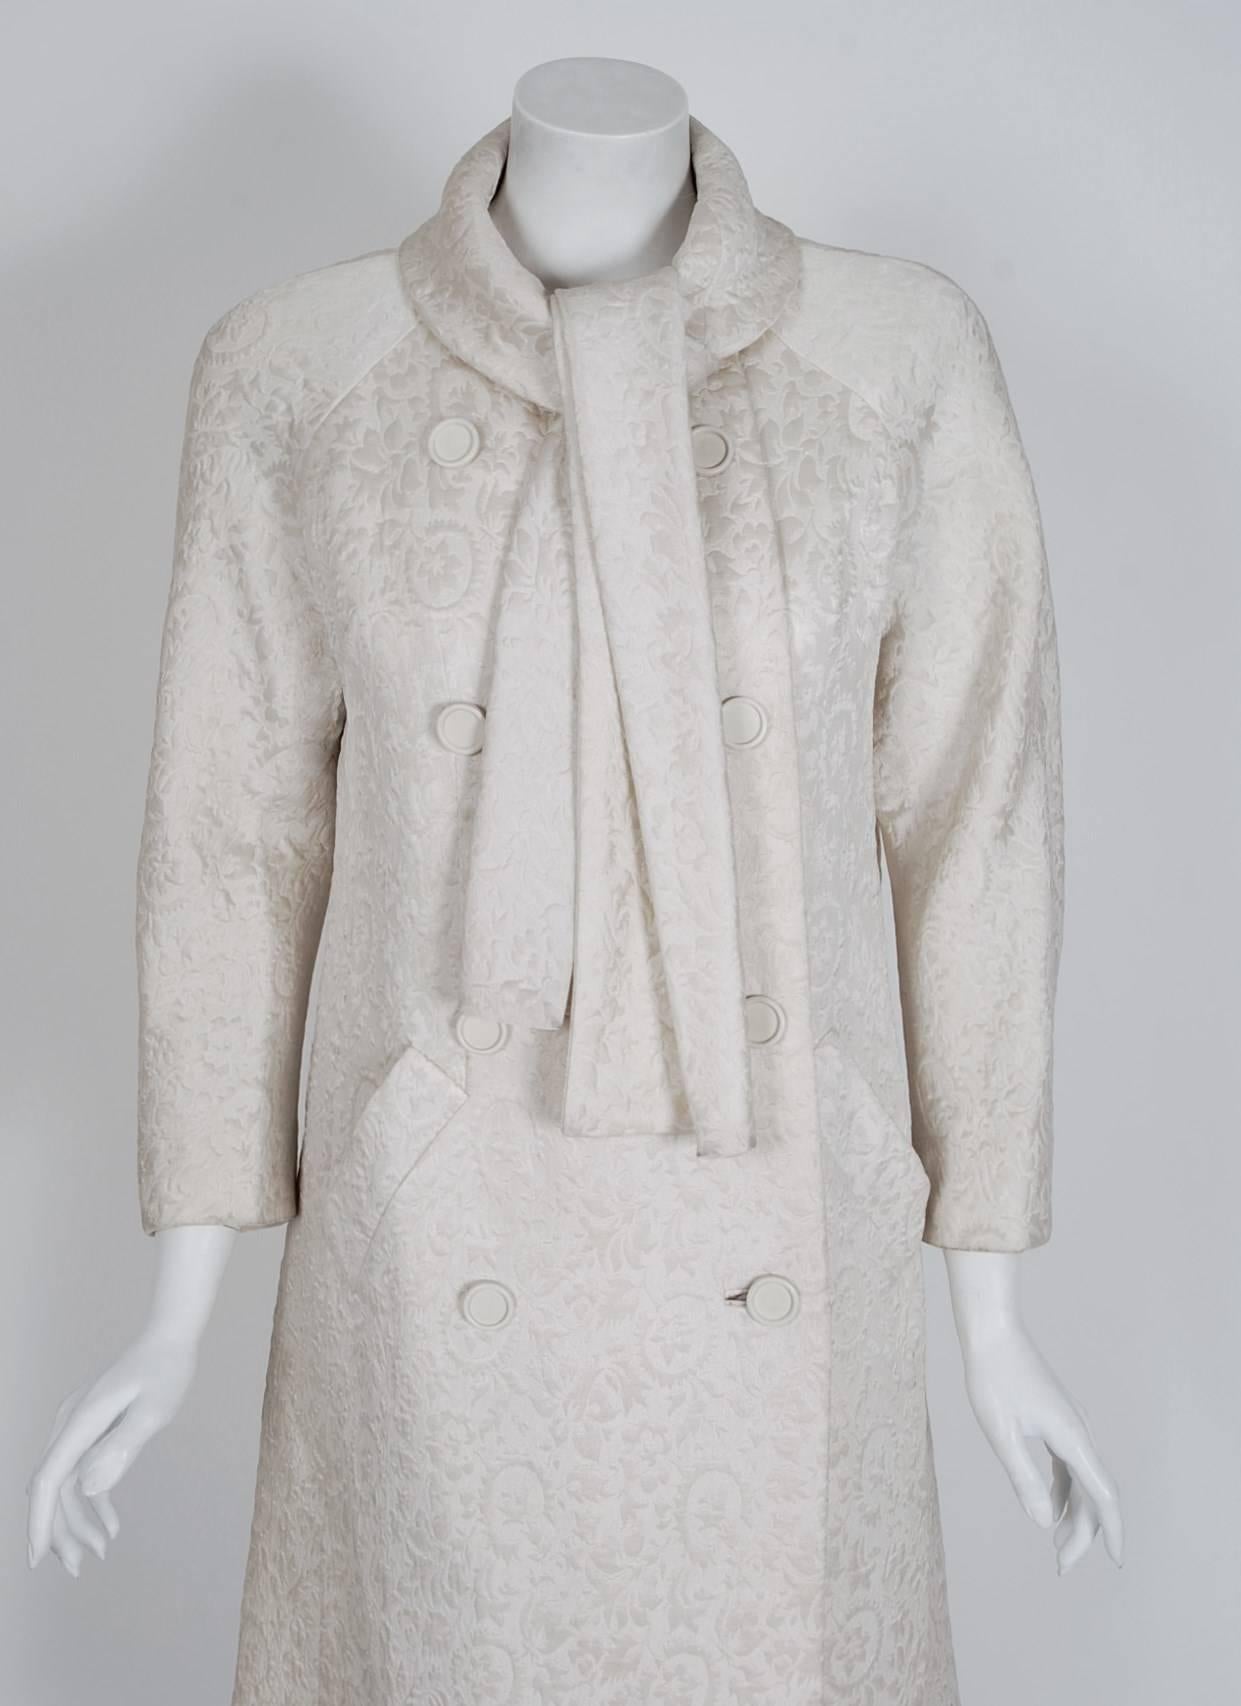 This Jean Patou ivory-white textured silk coat, in the most beautiful silhouette, is pure couture perfection. Jean Patou's affinity for tailored design and elaborate materials is wonderful for the modern woman. Not only is this garment very